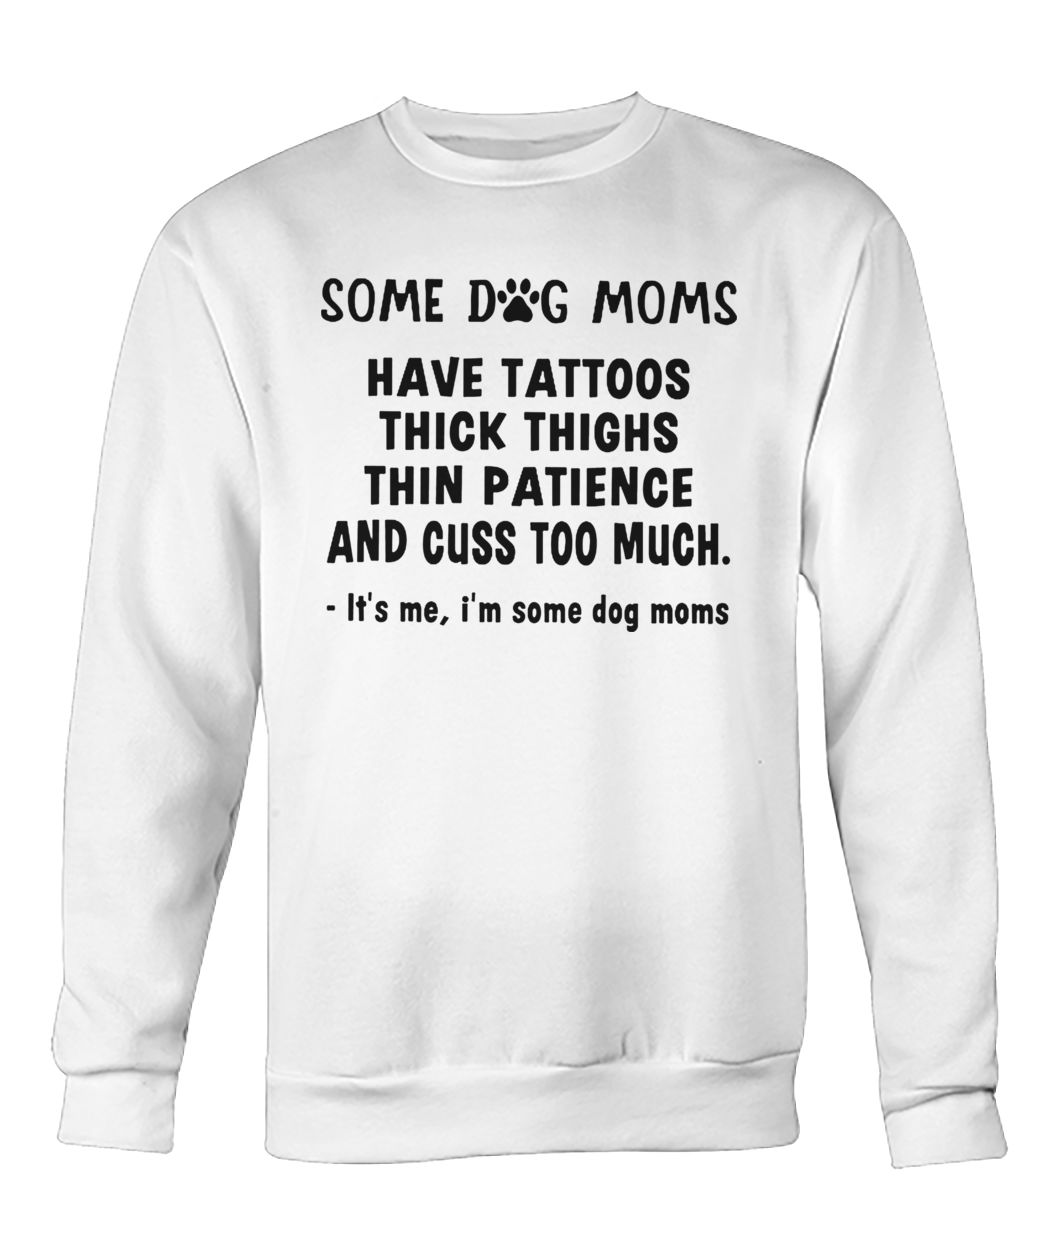 Some dog moms have tattoos thick thinks thin paticence and cuss too much it's me I'm some dog moms crew neck sweatshirt